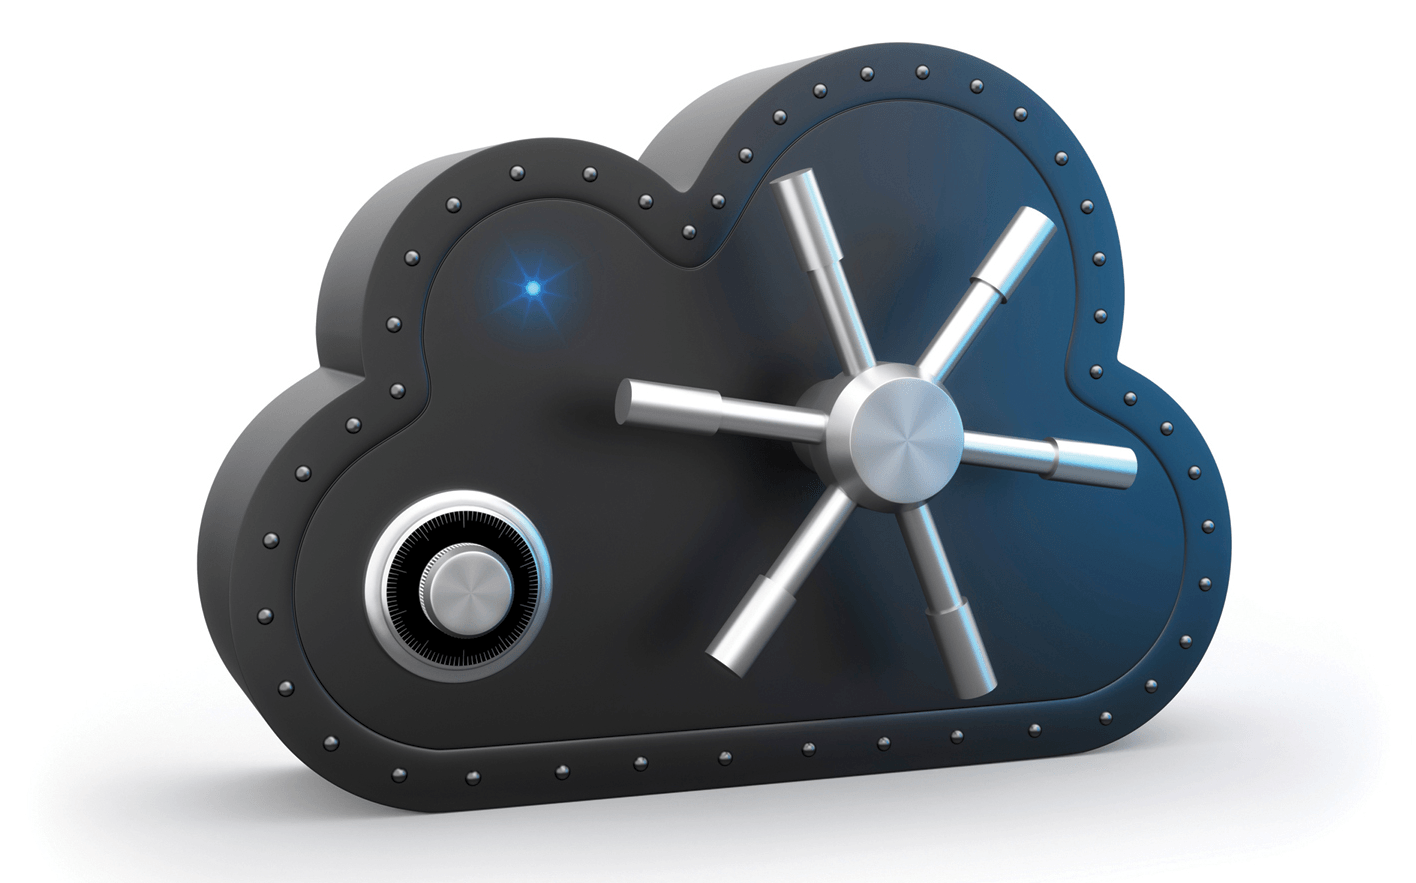 15 Cloud Storage Tips And Tricks You Probably Don’t Know